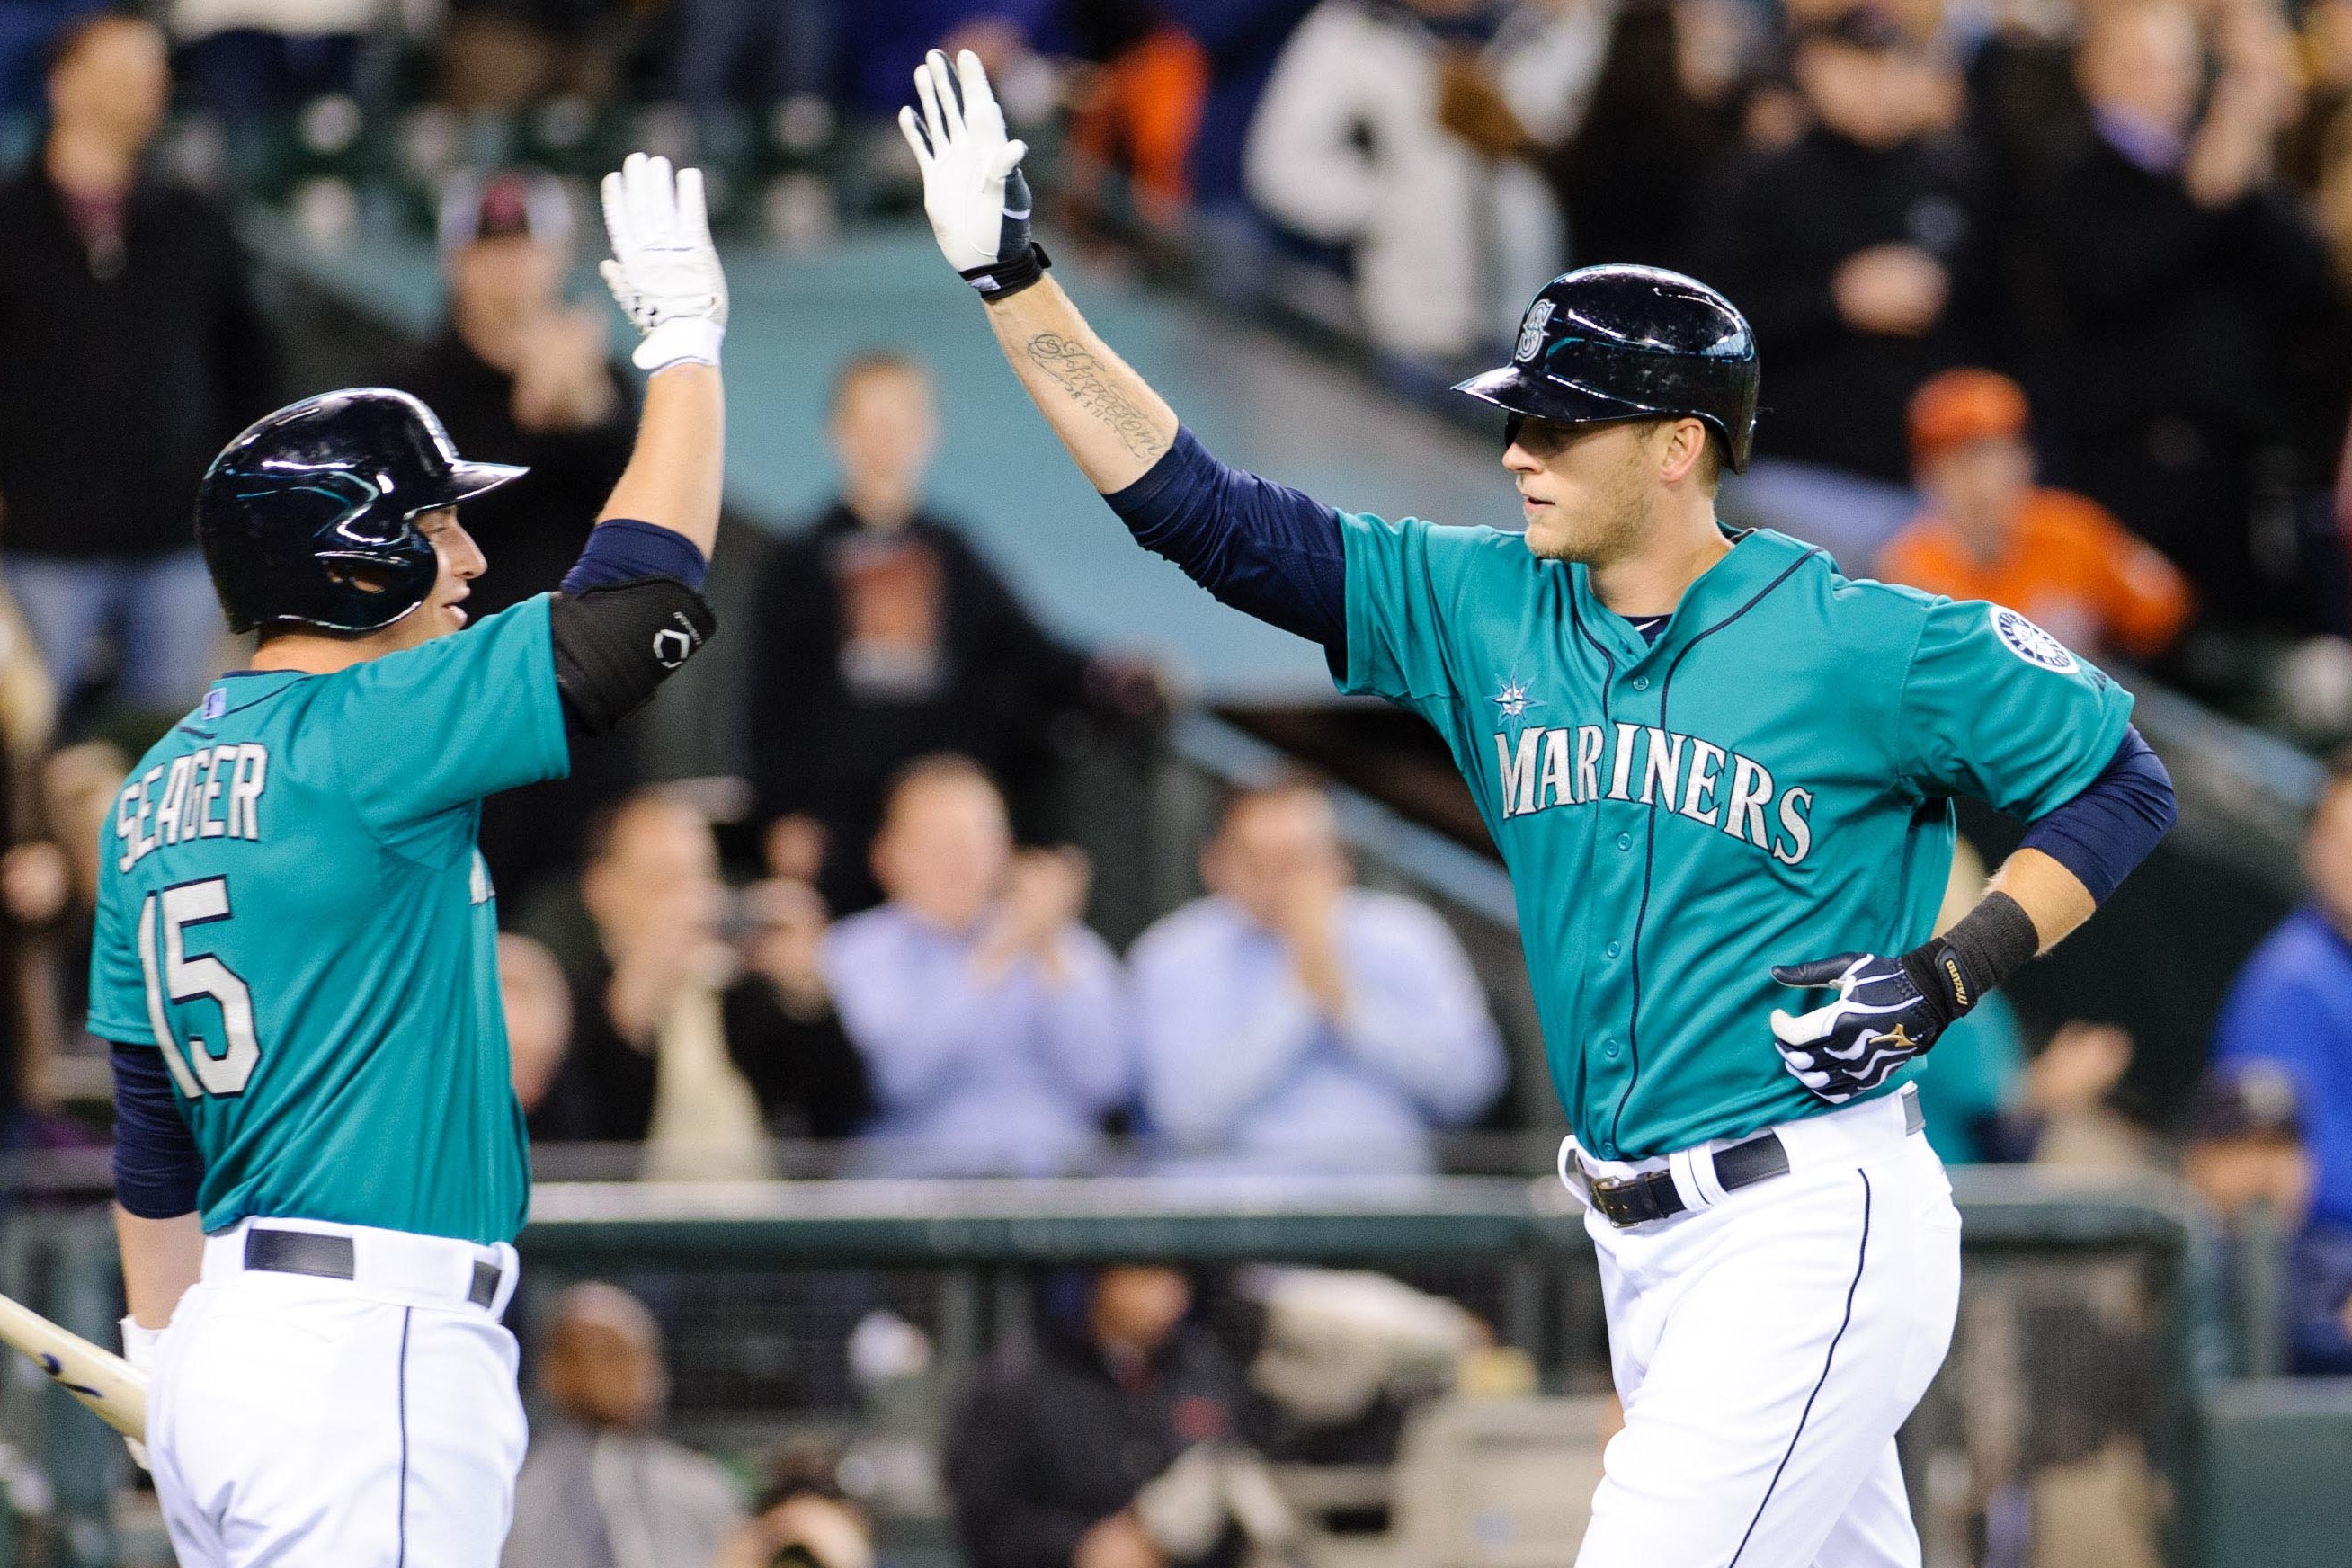 Seattle Mariners: Michael Saunders and Kyle Seager Form Solid 1-2